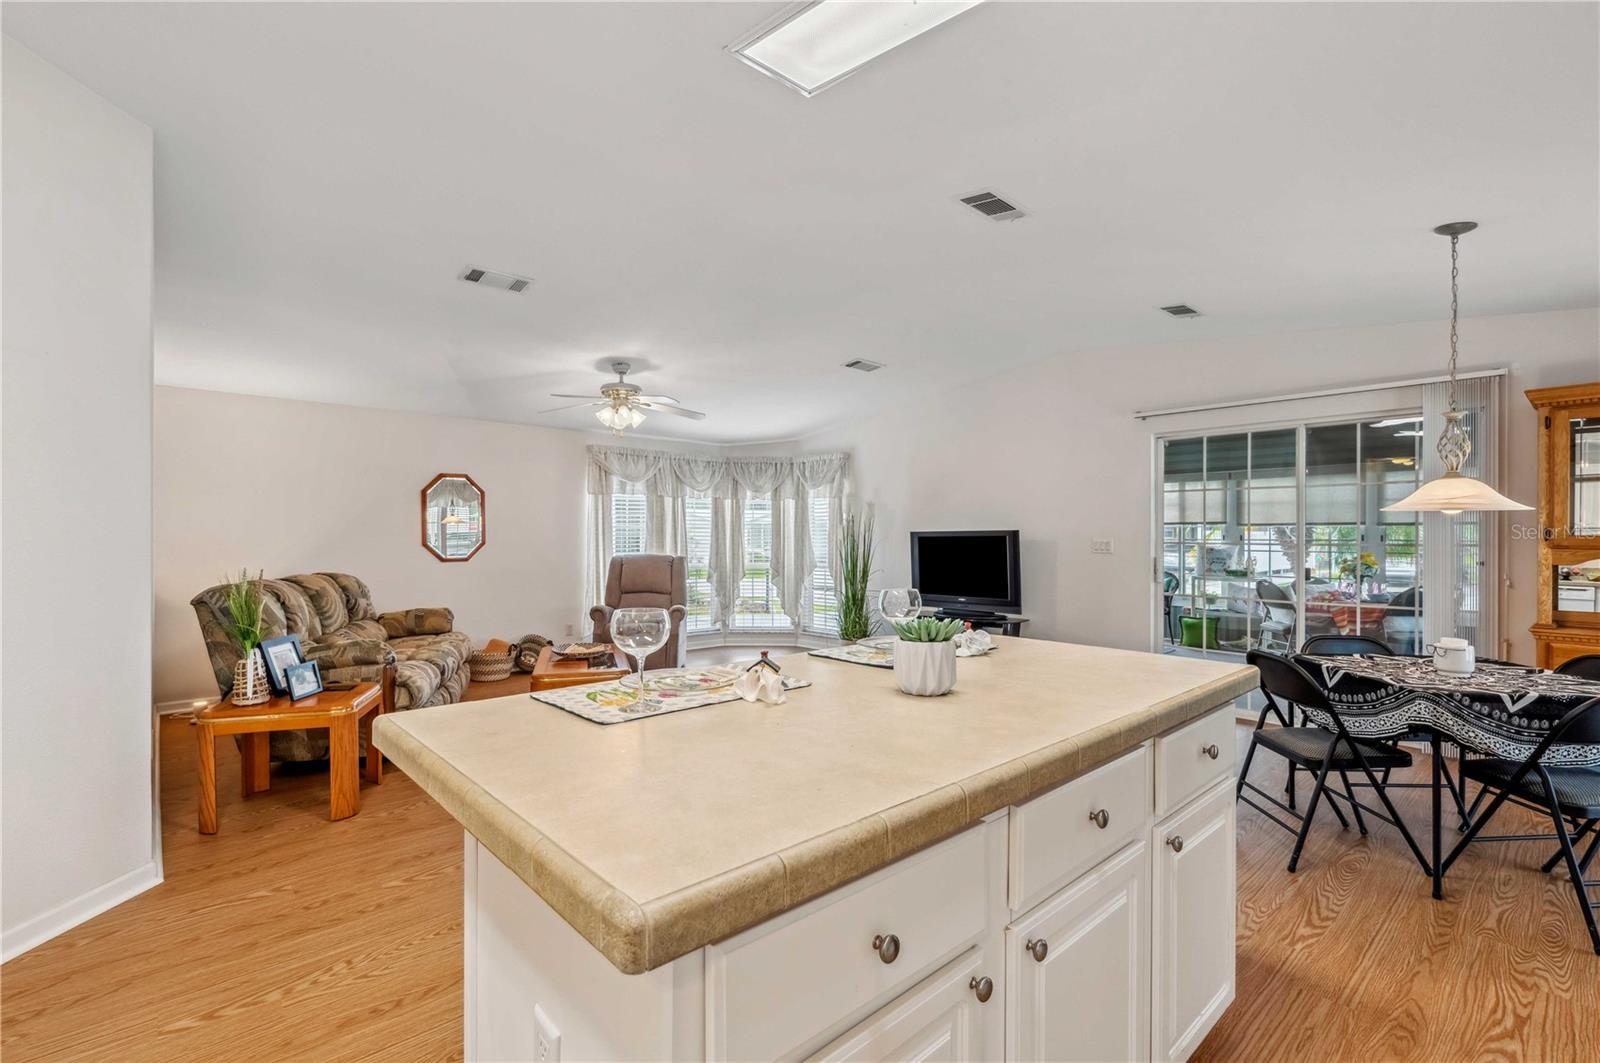 Kitchen, dining, and living room offer open concept for easy entertaining.